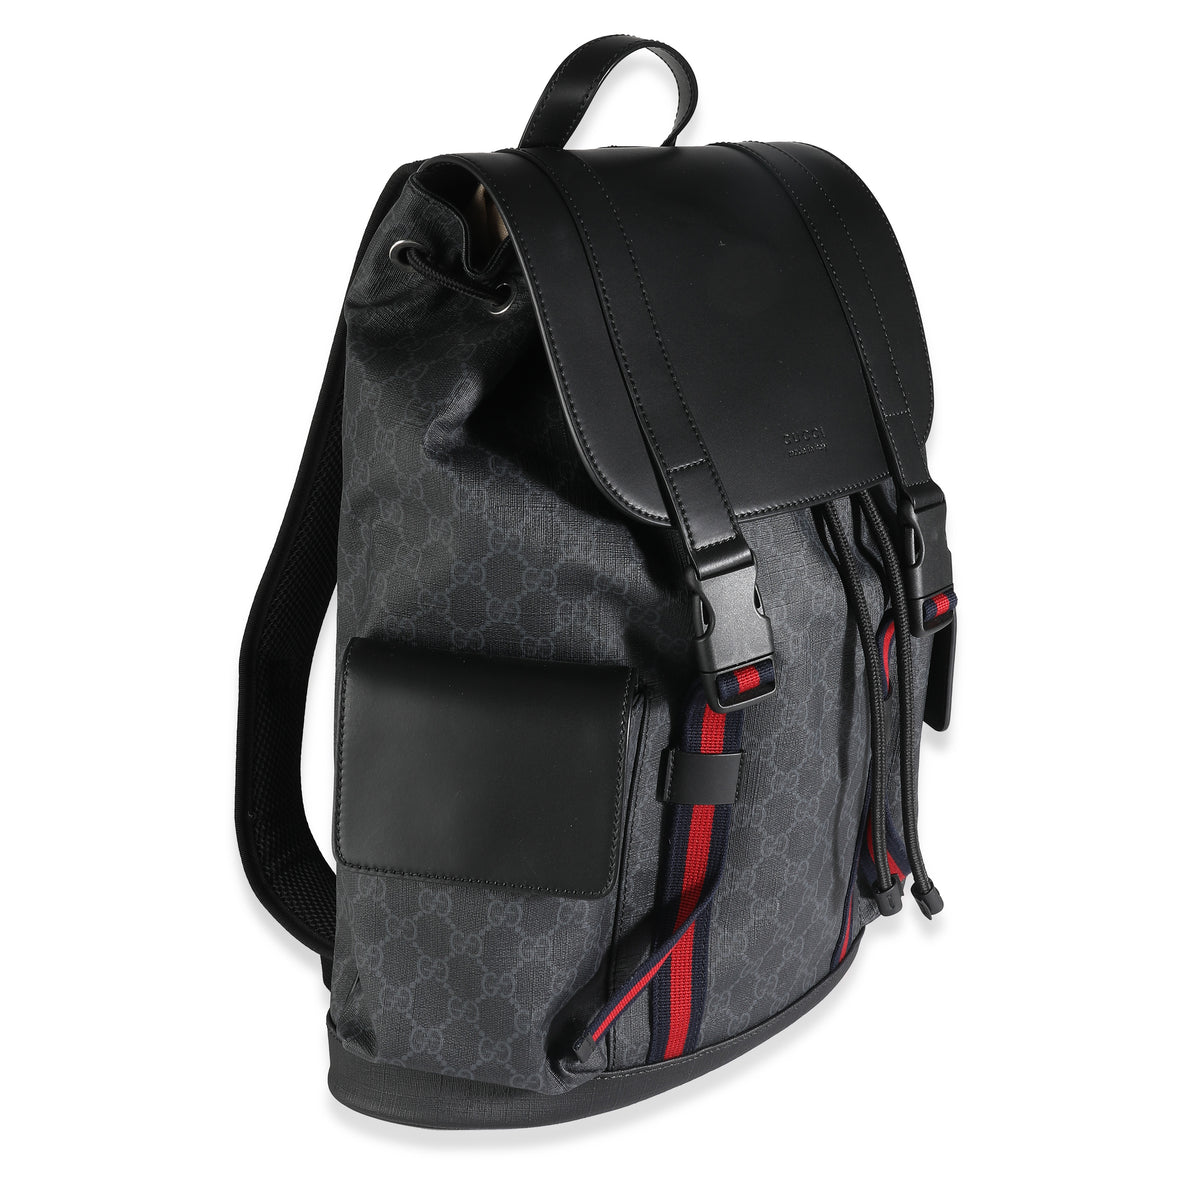 Black GG Supreme Canvas Double Buckle Backpack